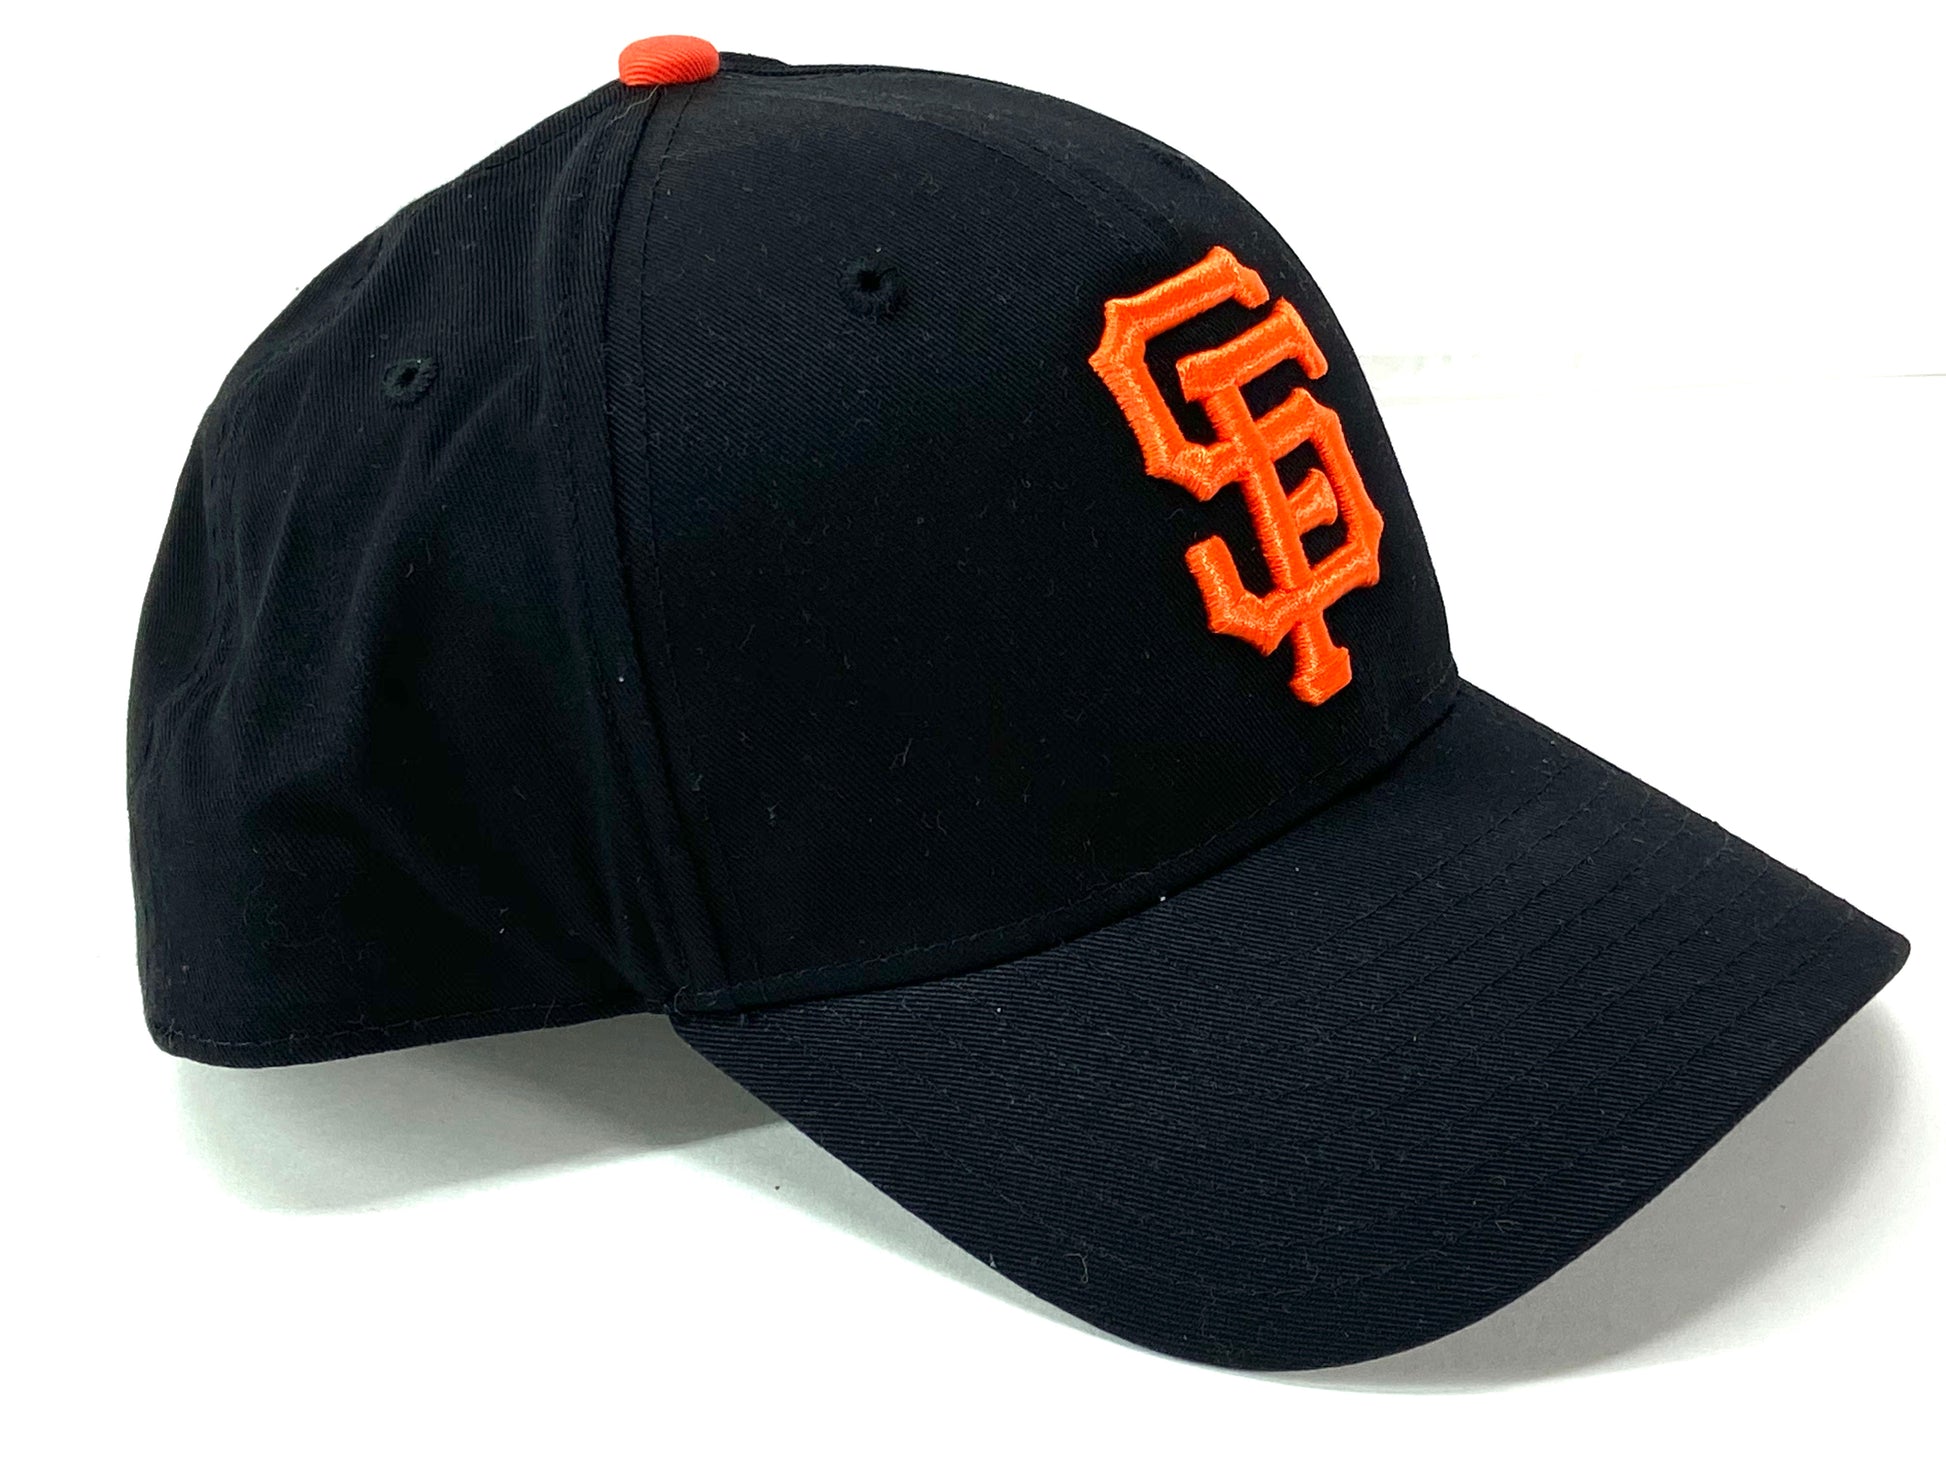 47 San Francisco Giants Black White Outline Clean Up Adjustable Hat, Adult  One Size Fits All